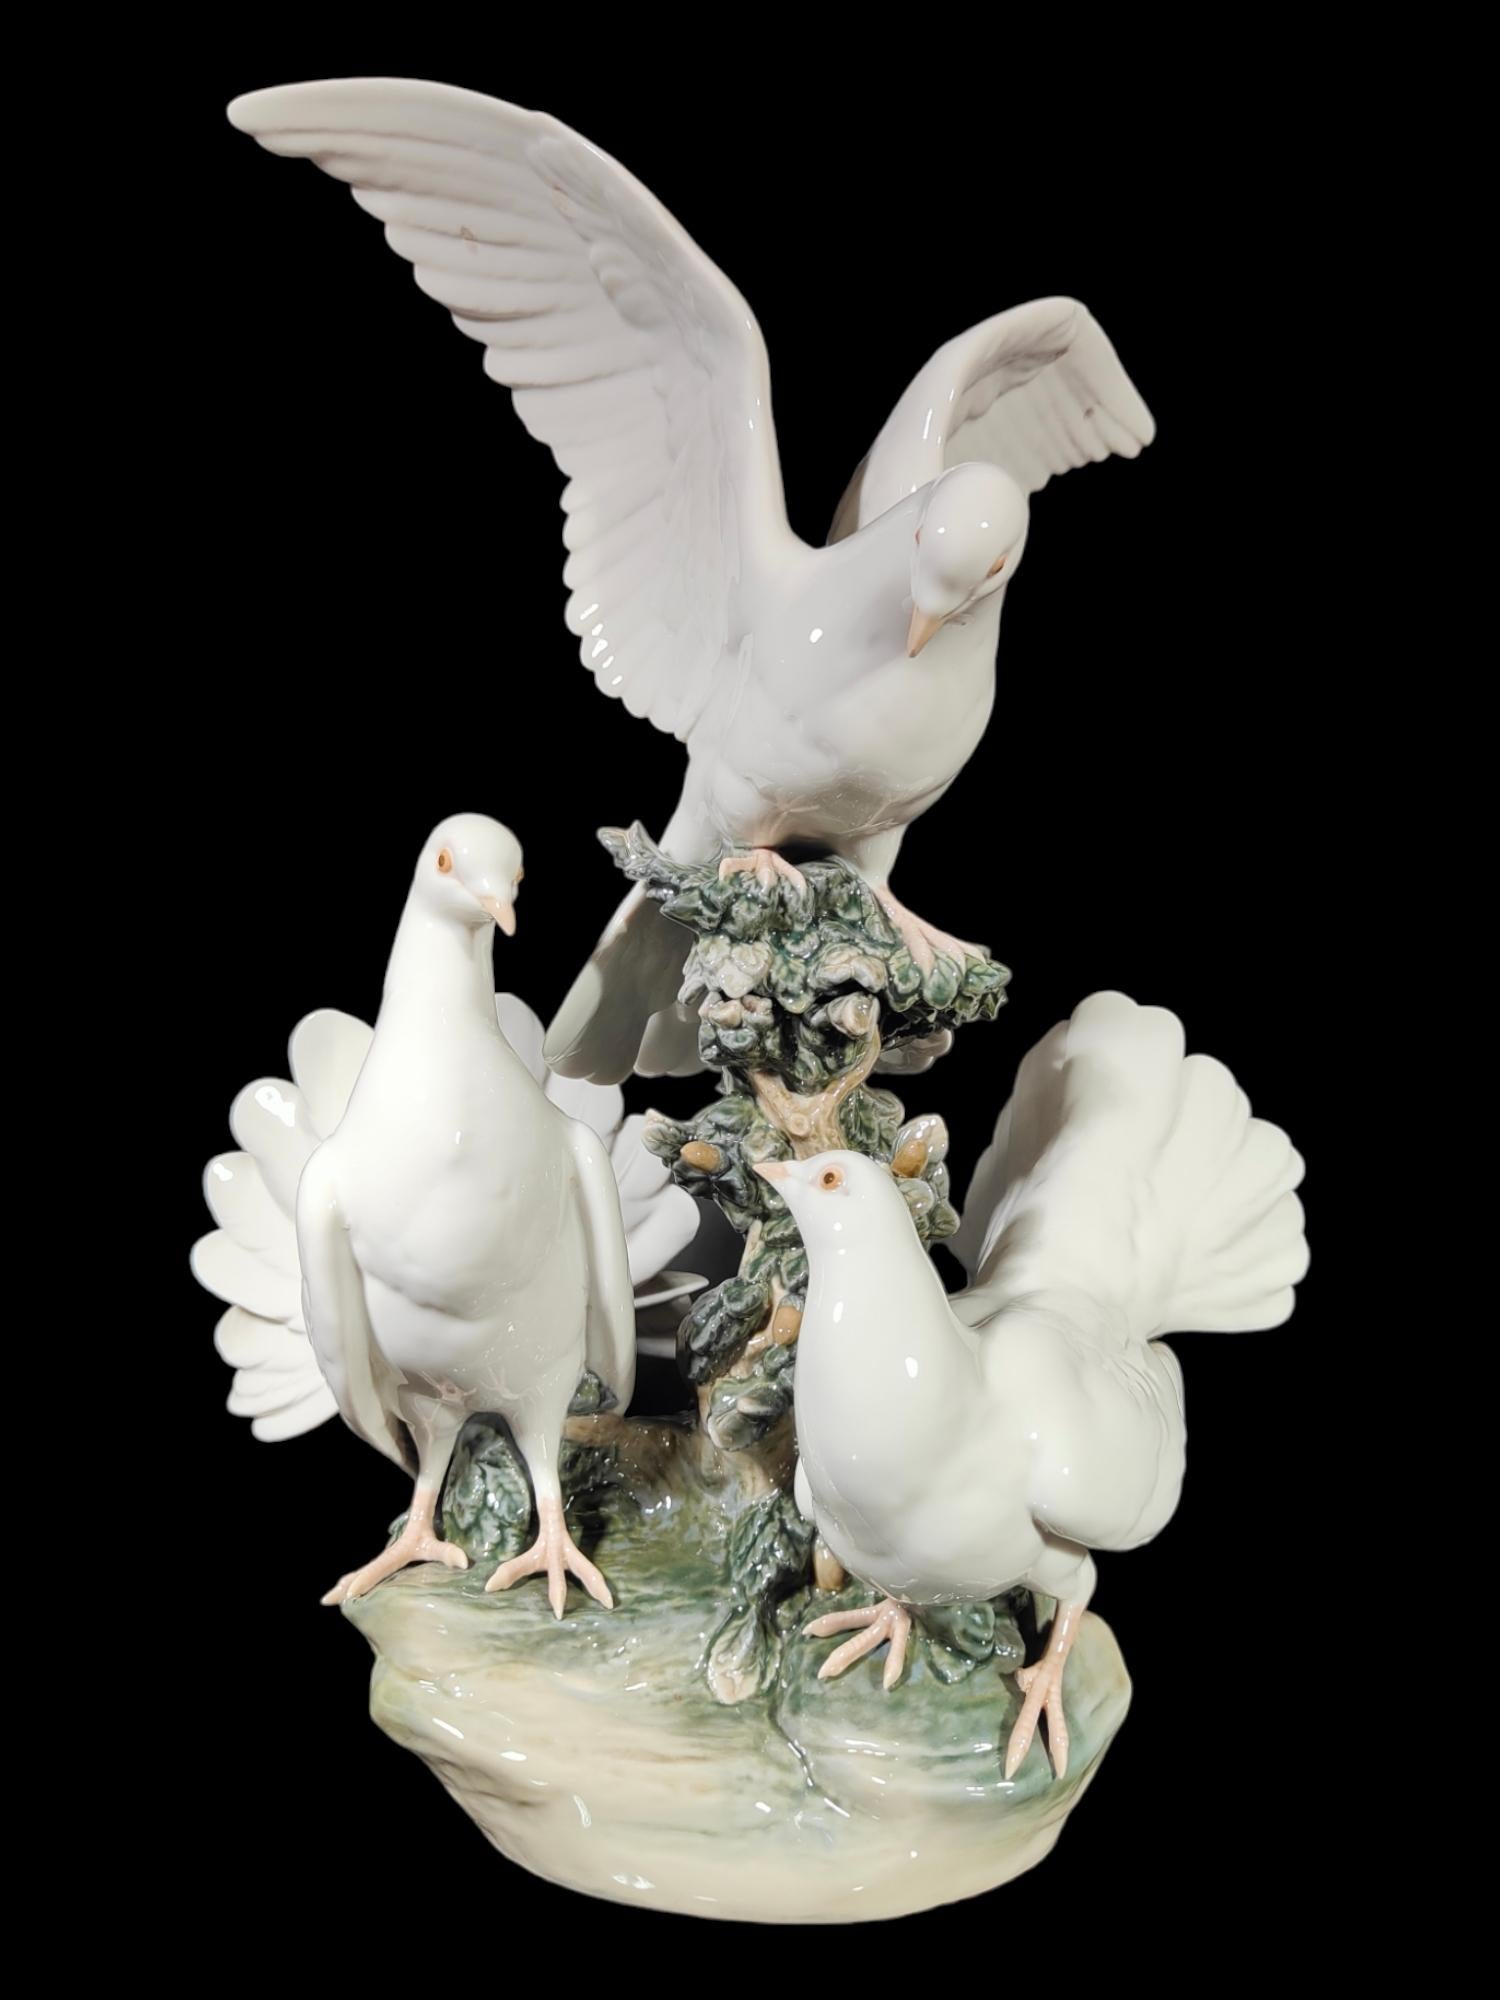 Lladro porcelain sculpture with doves.
Elegant lladro porcelain sculpture with doves made in the 1970s. Discontinued. Perfect condition. Measures: 55x40x30 cm
The Lladró factory is known for being the most prestigious firm of porcelain pieces in